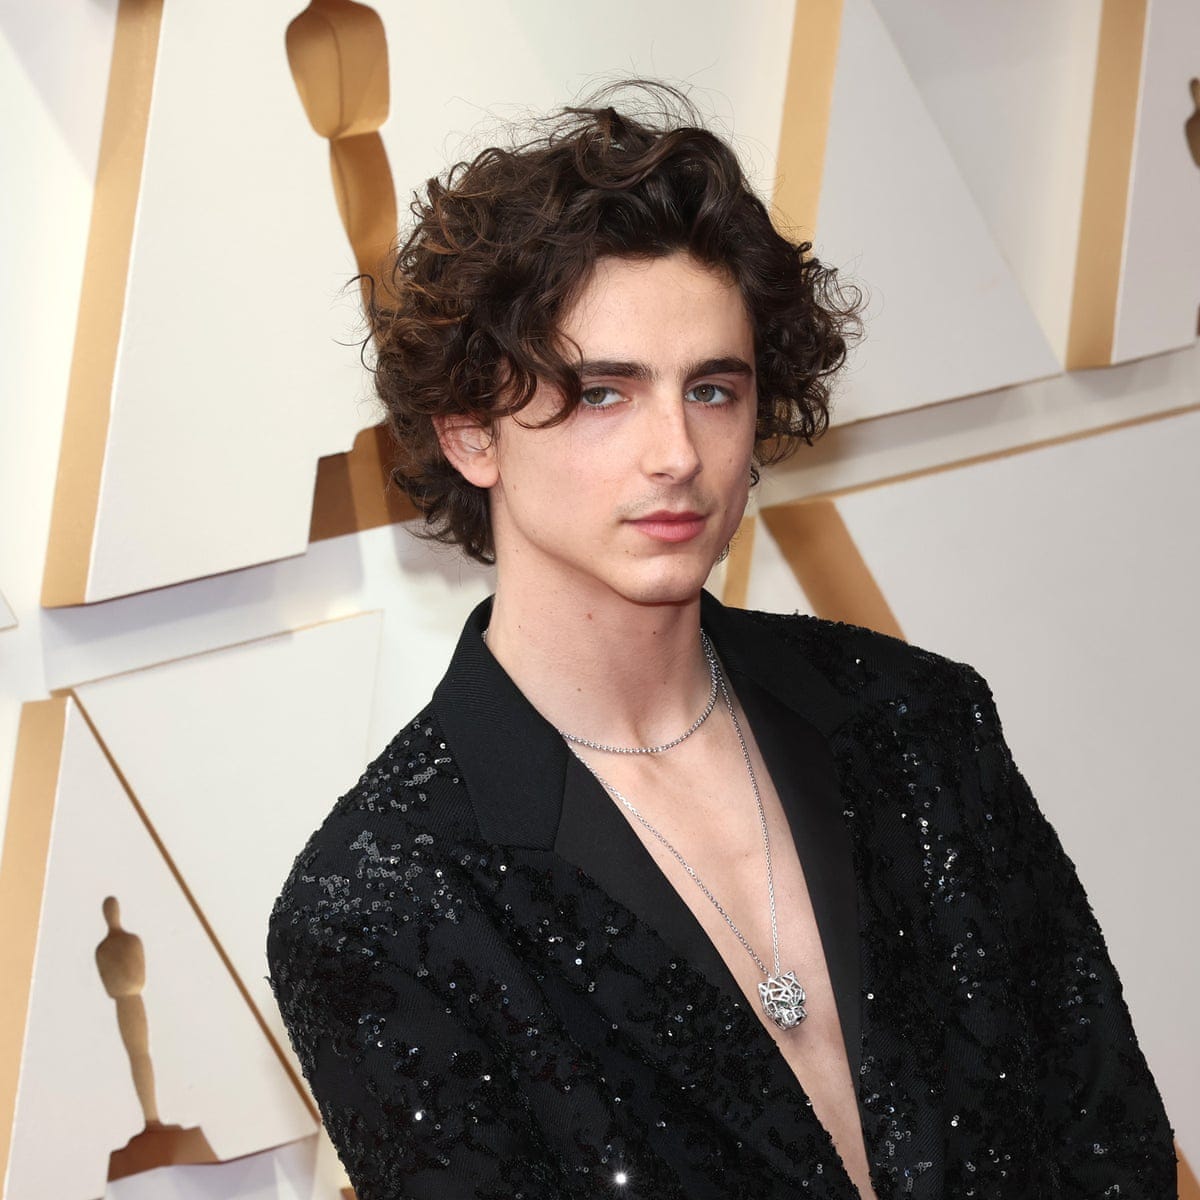 Chest in show: Timothée Chalamet gives 2022's Oscar red carpet its biggest  fashion moment | Oscars 2022 | The Guardian